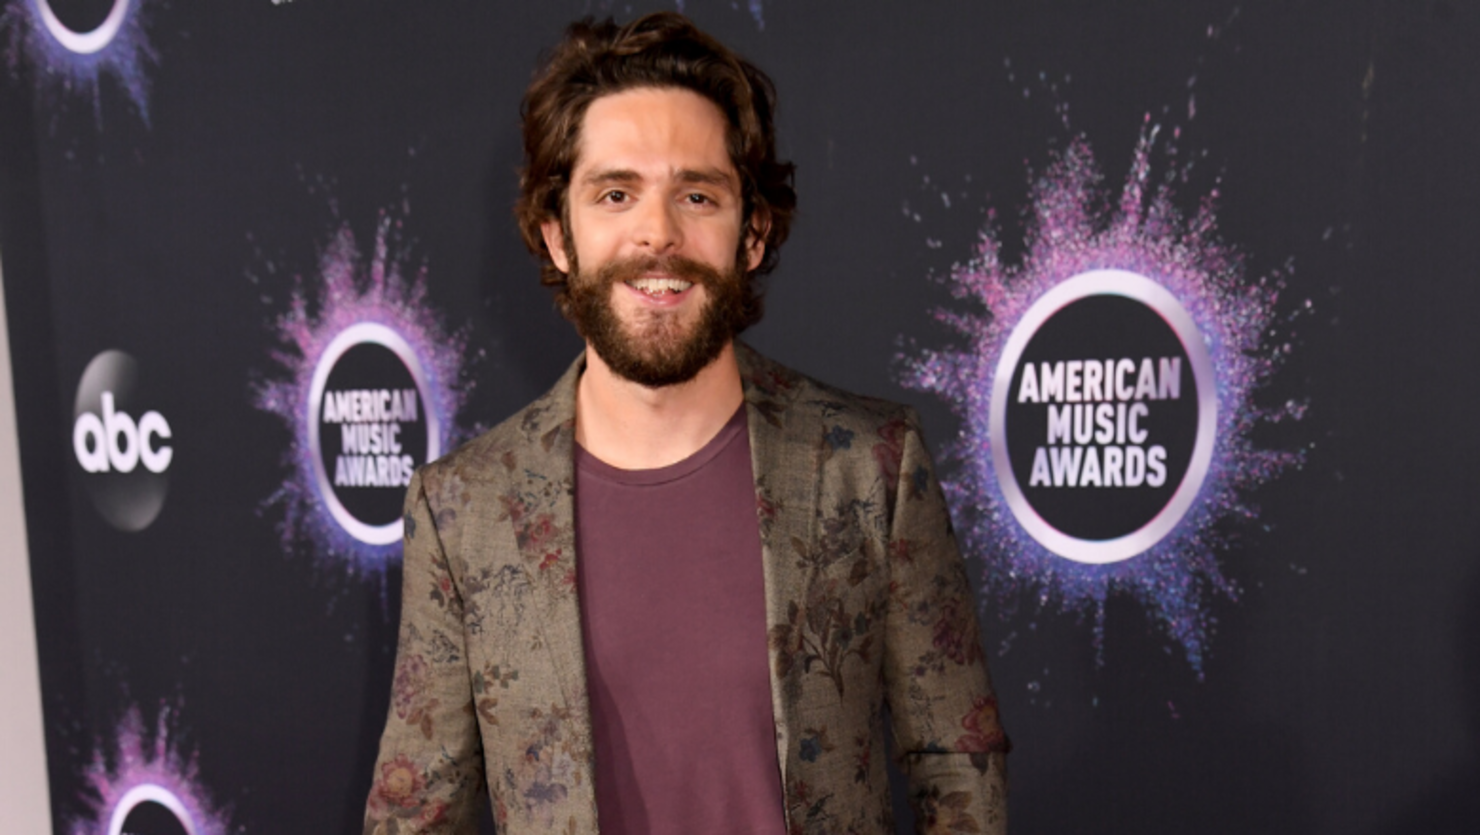 Thomas Rhett Says His 2019 New Year's Resolution Was To 'Live Simpler'